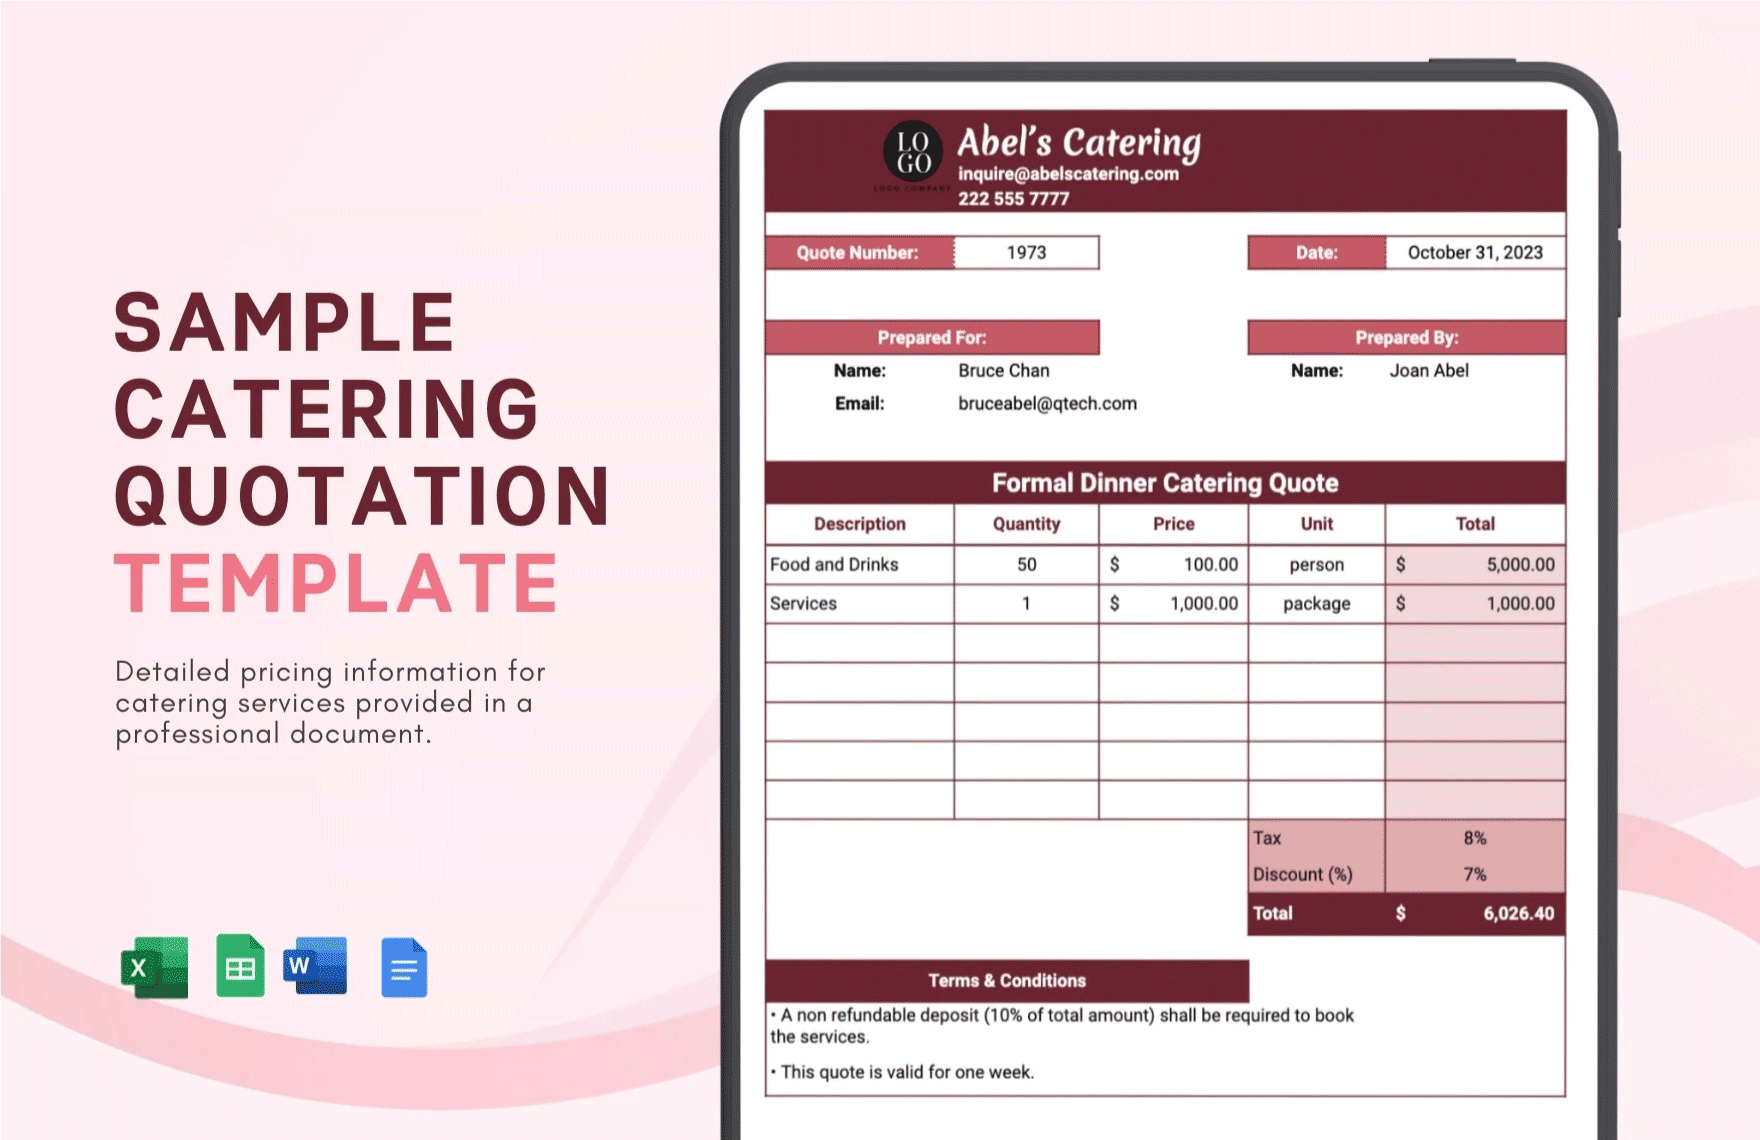 Sample Catering Quotation Template in Word, Google Docs, Excel, Google Sheets